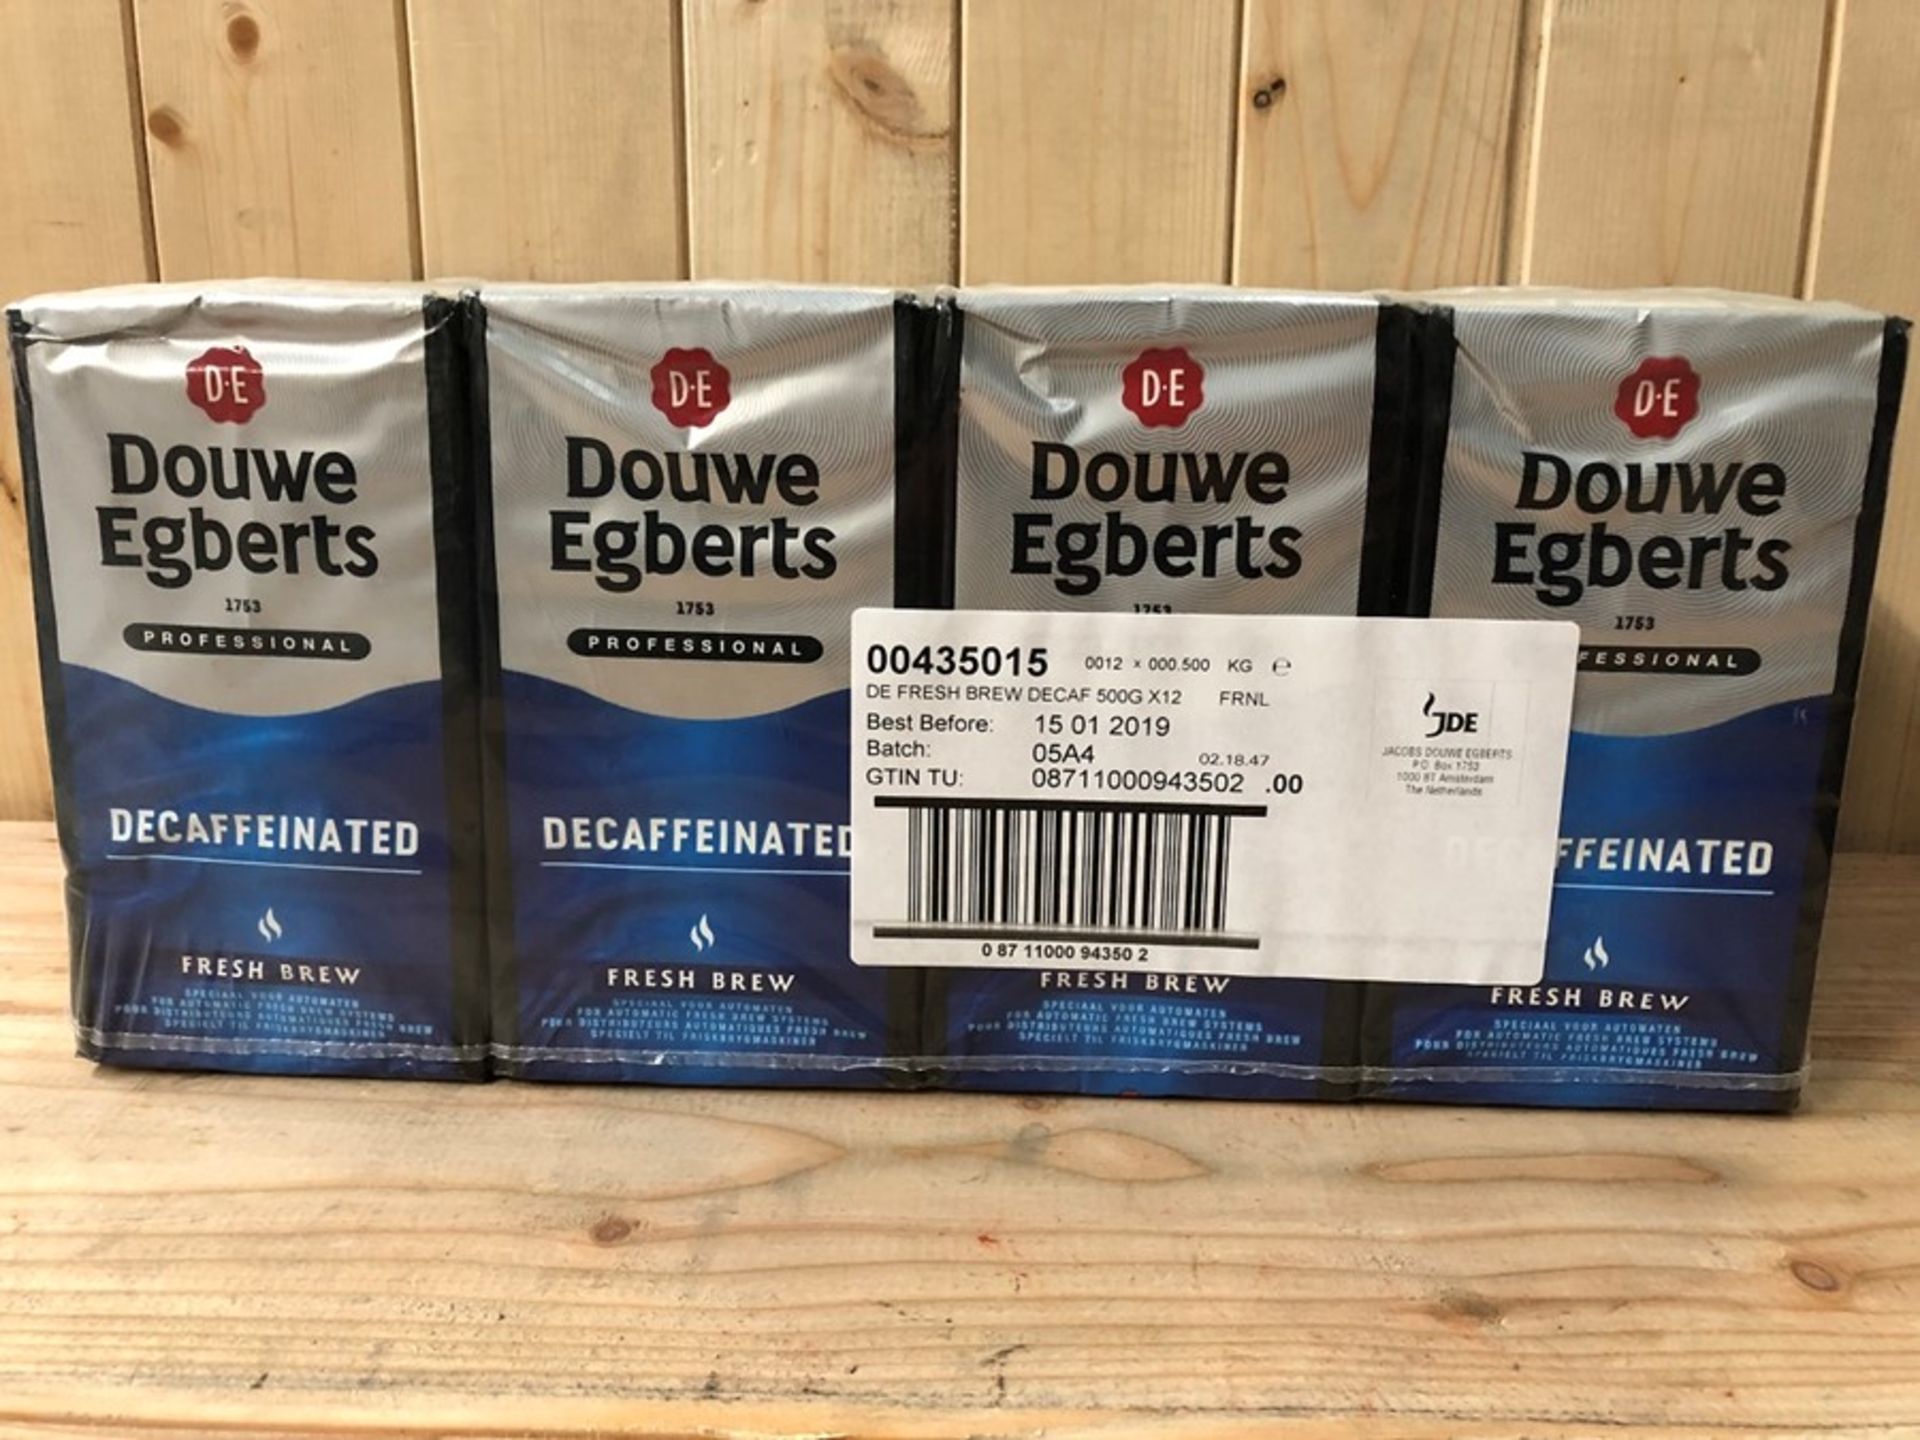 1 LOT TO CONTAIN 12 PACKS OF DOUWE EGBERTS DECAFFEINATED FRESH BREW - GROUND COFFEE / BEST BEFORE: